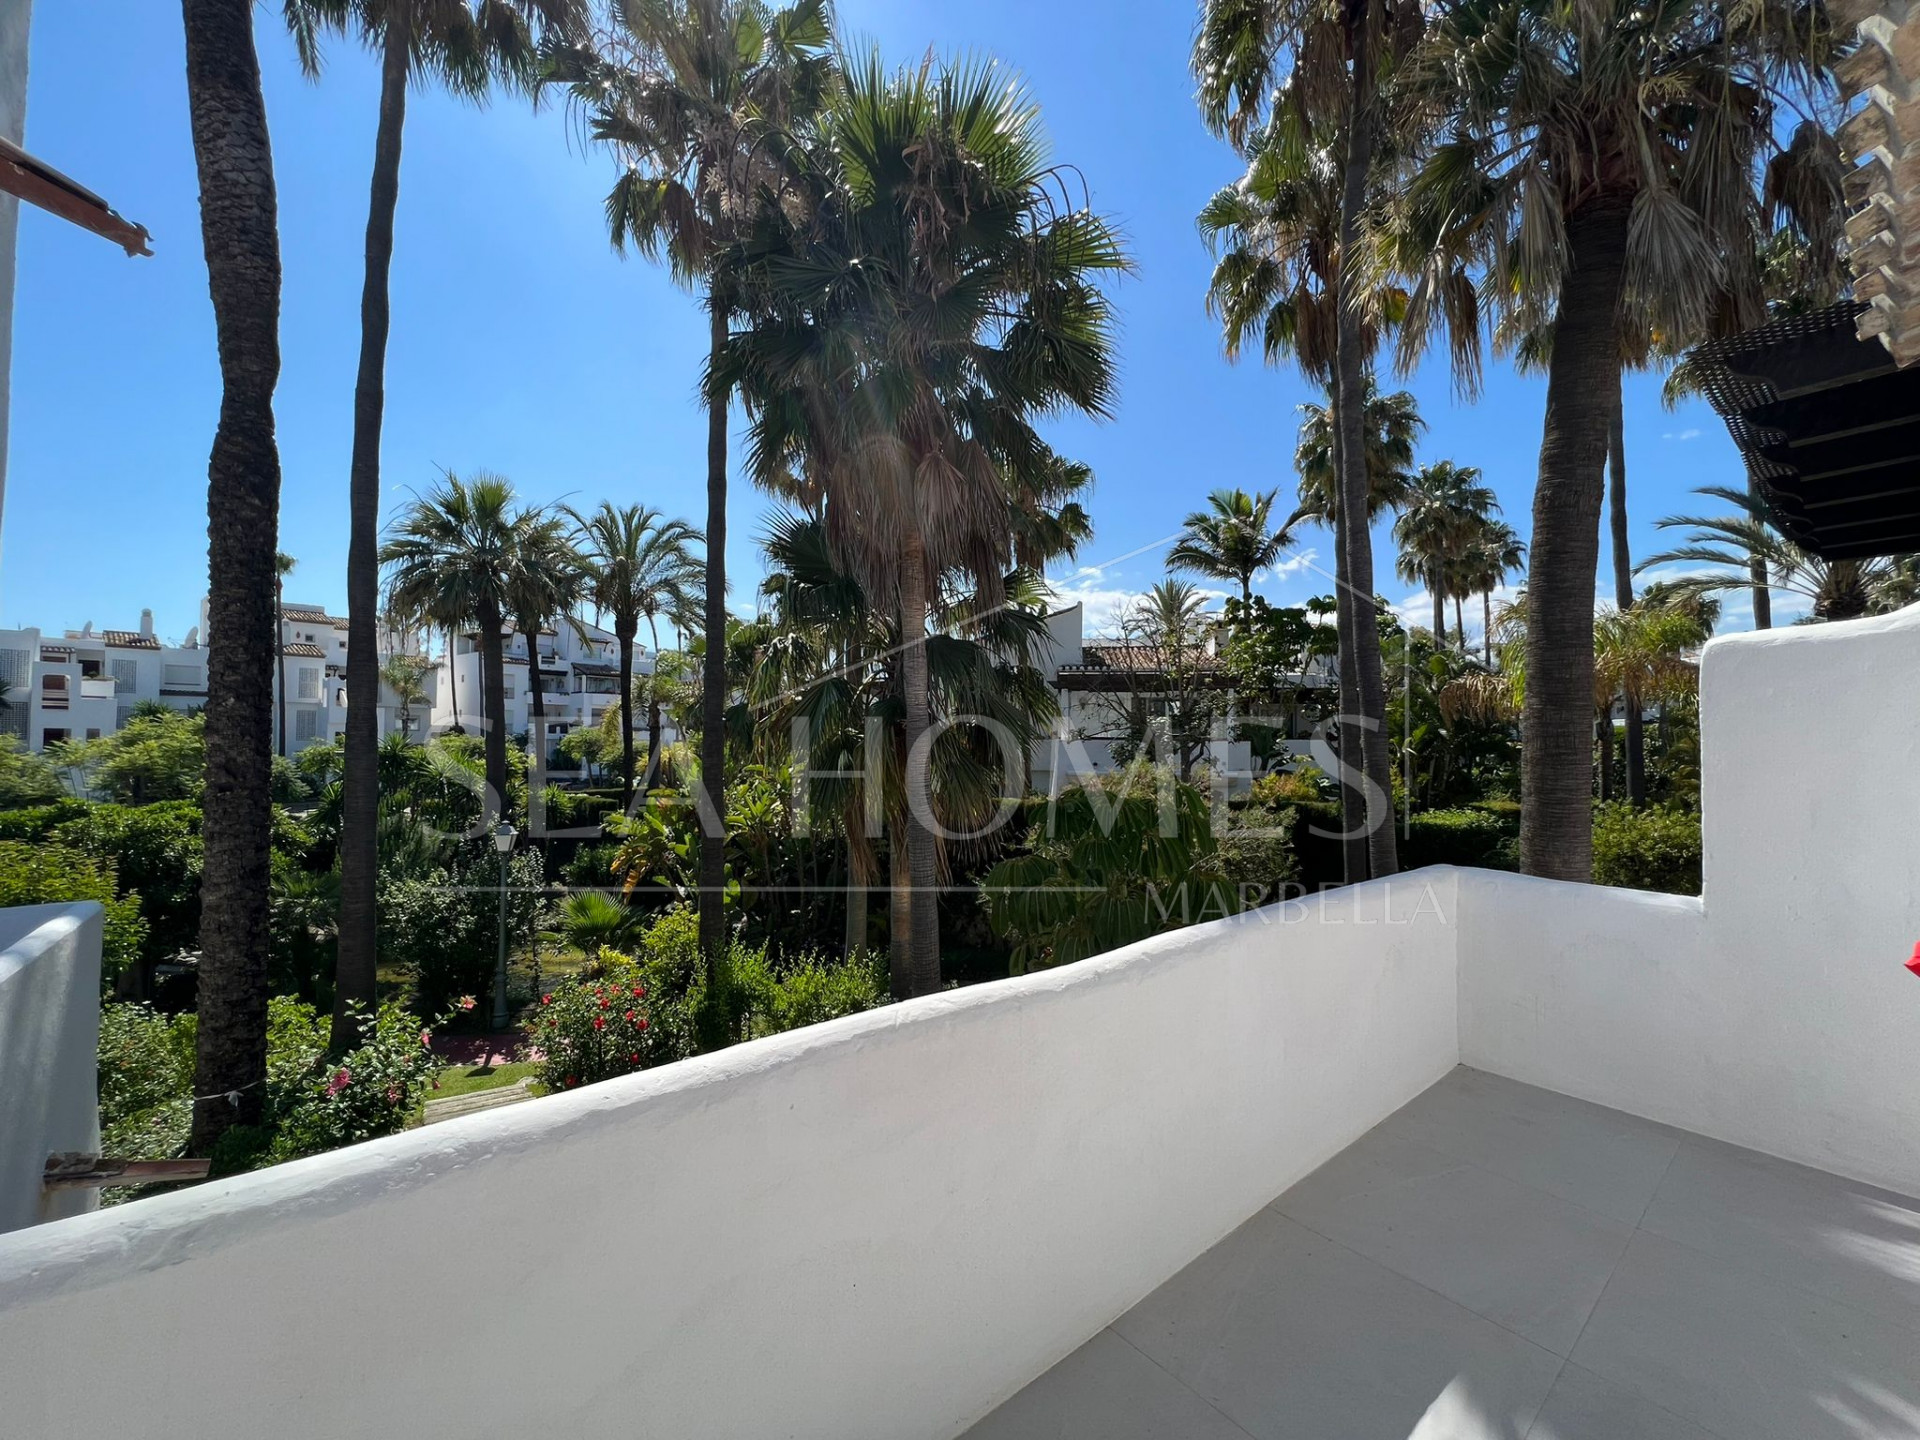 Spectacular three bedroom townhouse located in the very sought after beachside community Villas de Costalita